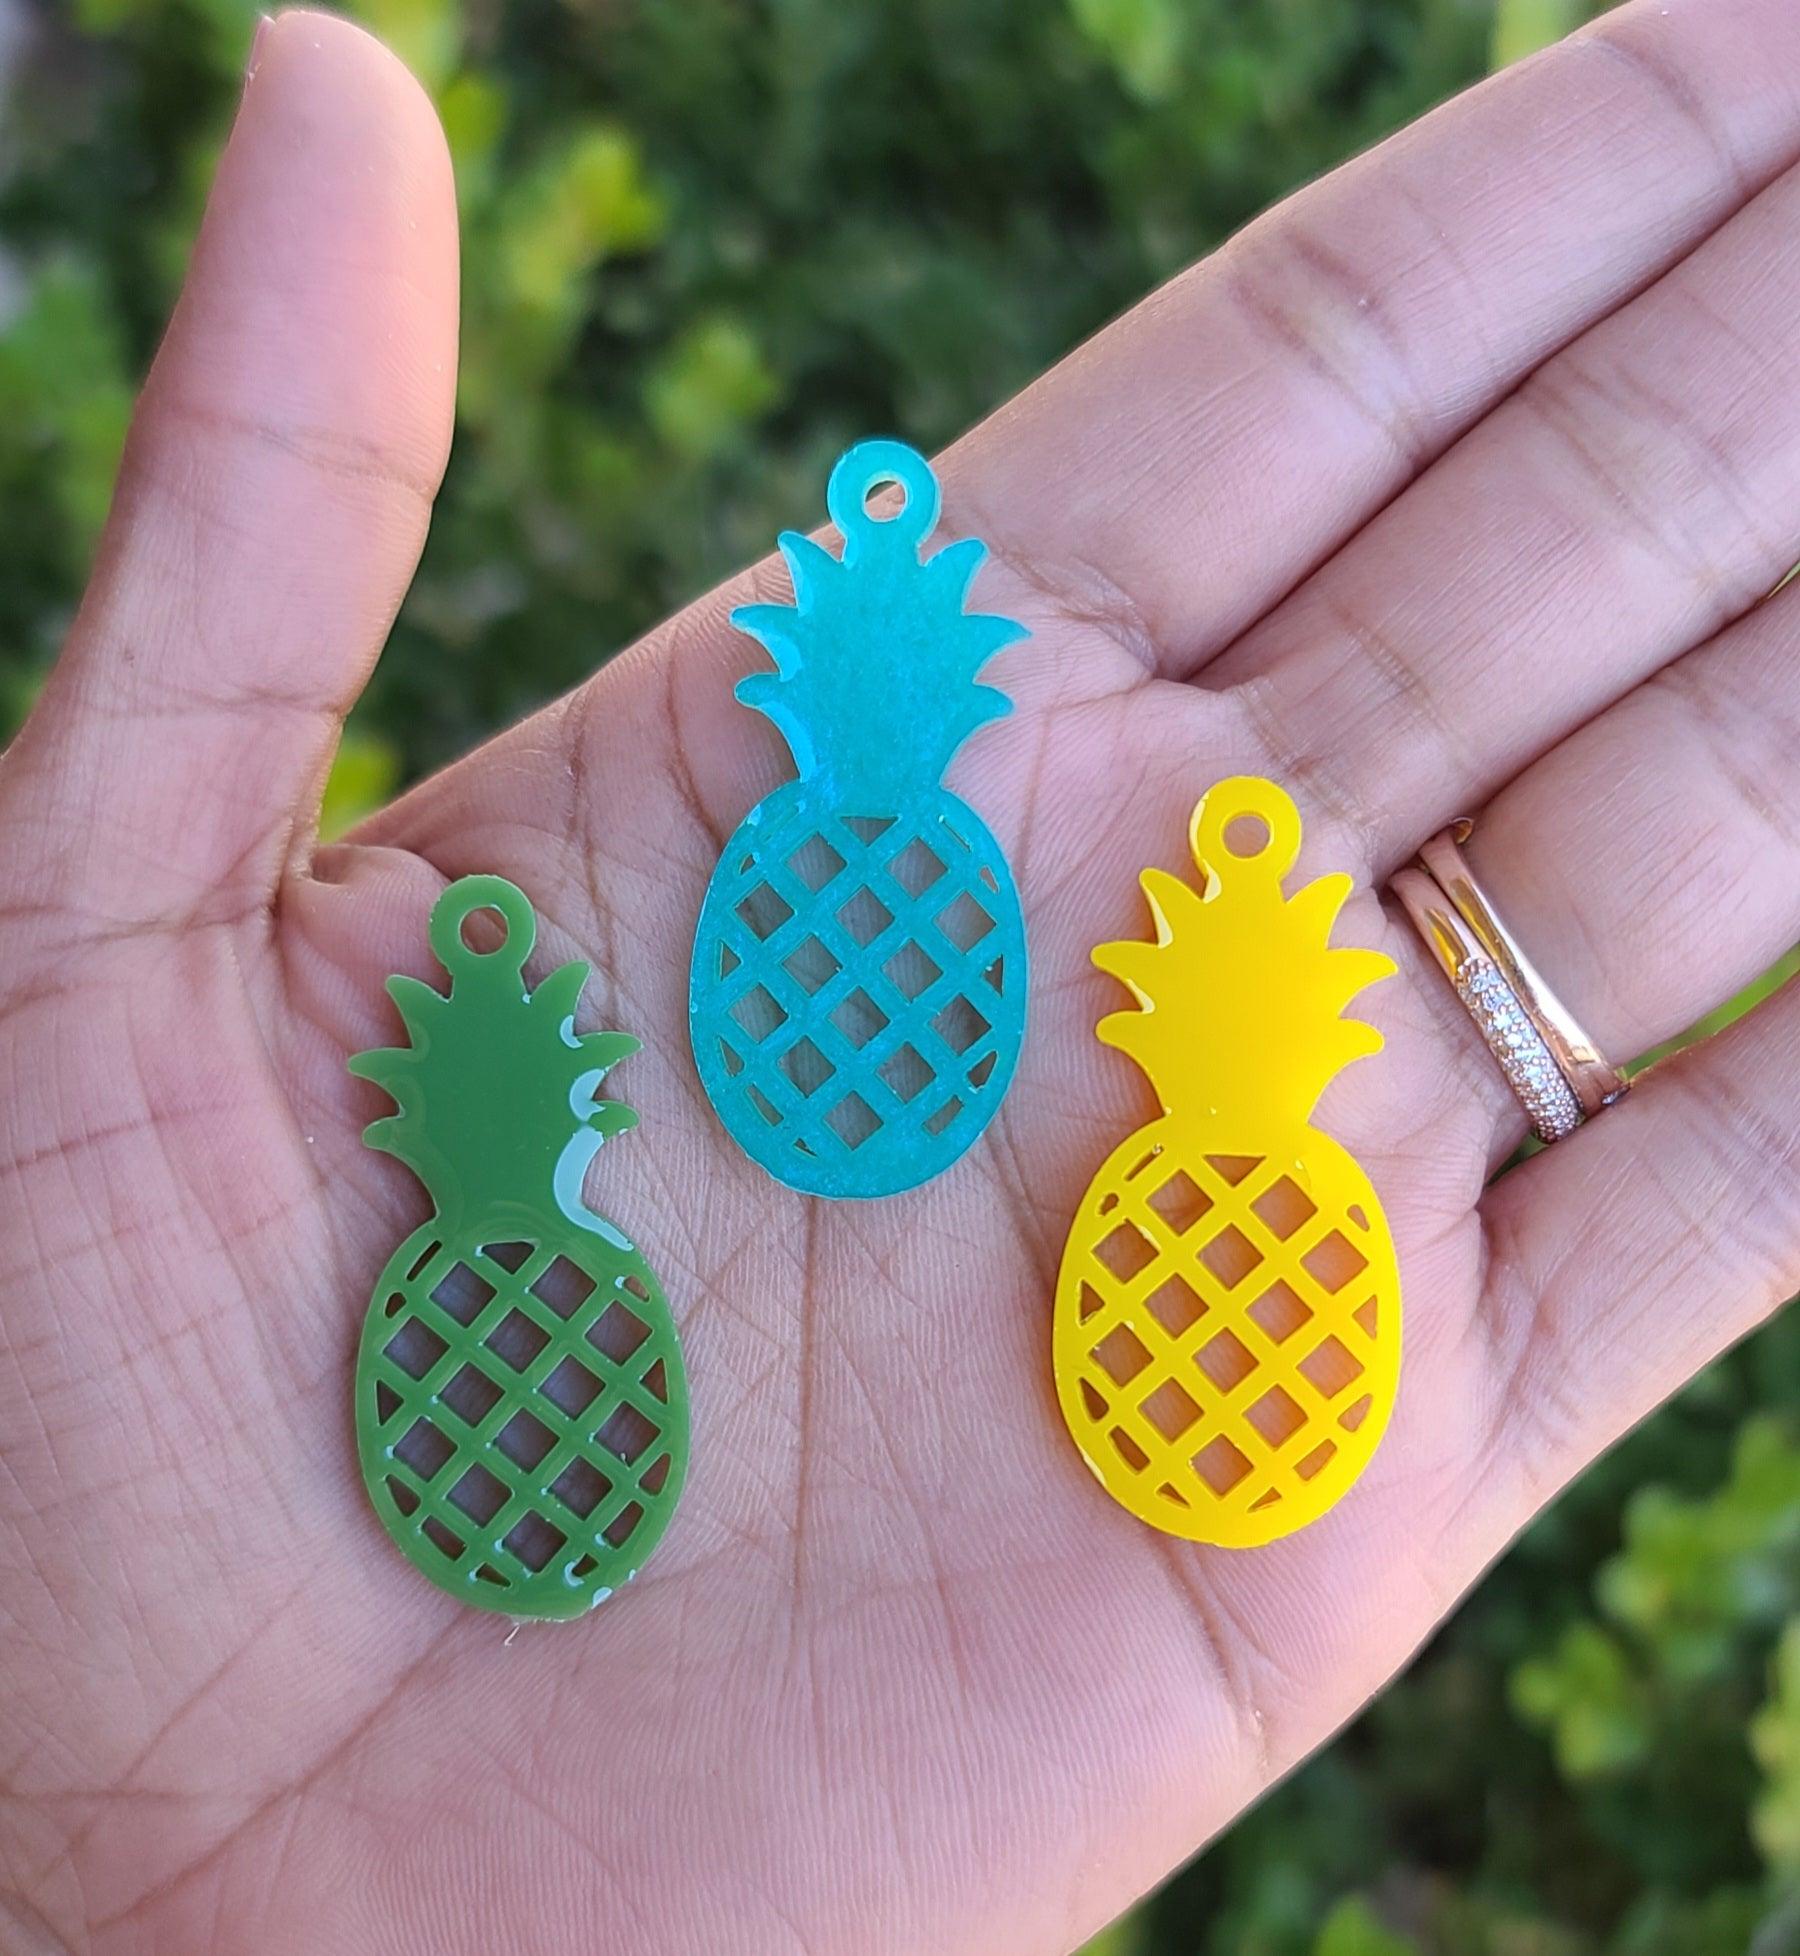 Pineapple Silicone Mold - Mold for Earrings - Silicon Jewelry mold - Molds for Epoxy Resin - Jewelry Making Mold for Keychain - Charms - Art By Suleny Craft Store LLC